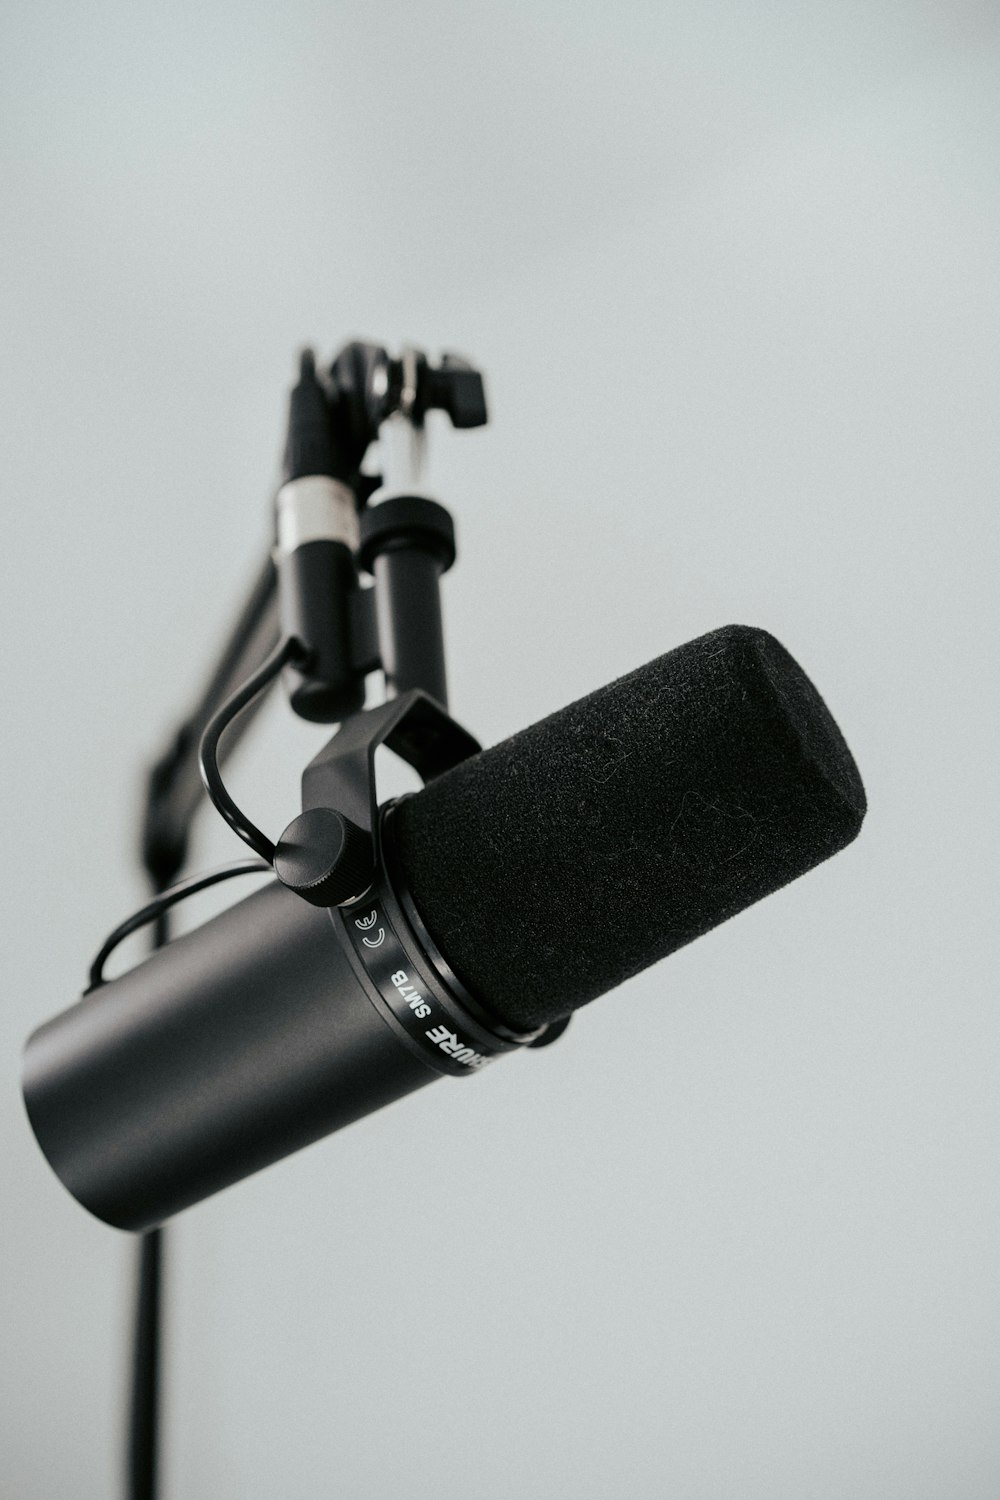 a microphone with a tripod attached to it